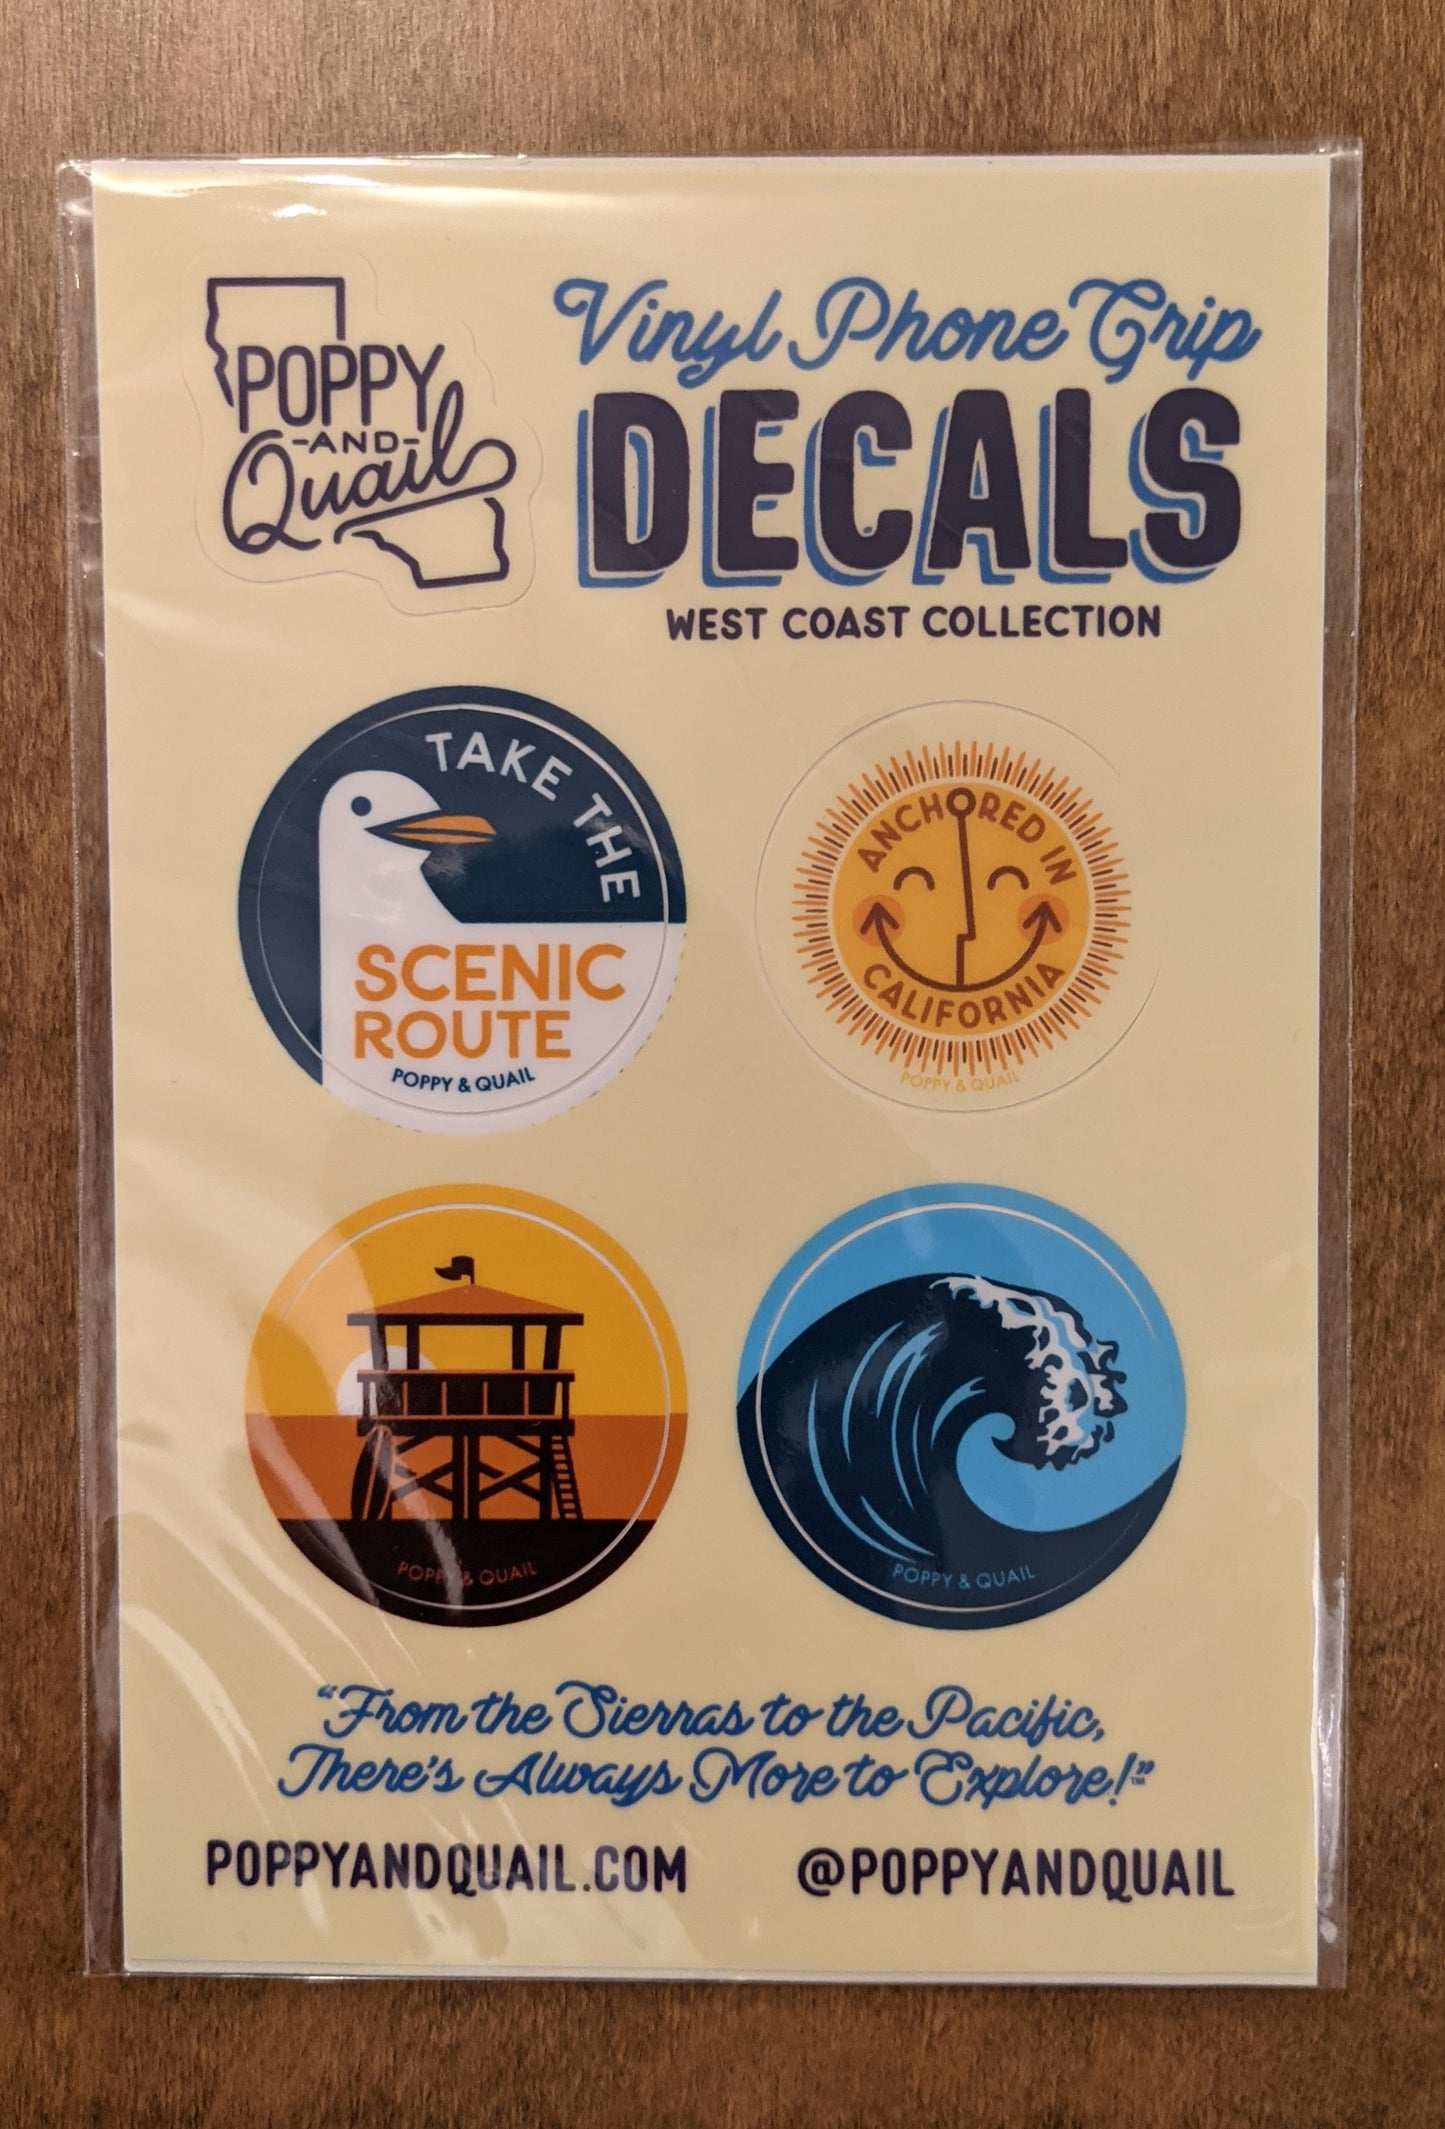 Vinyl phone grip sticker set, with four designs in the West Coast Collection by Poppy & Quail